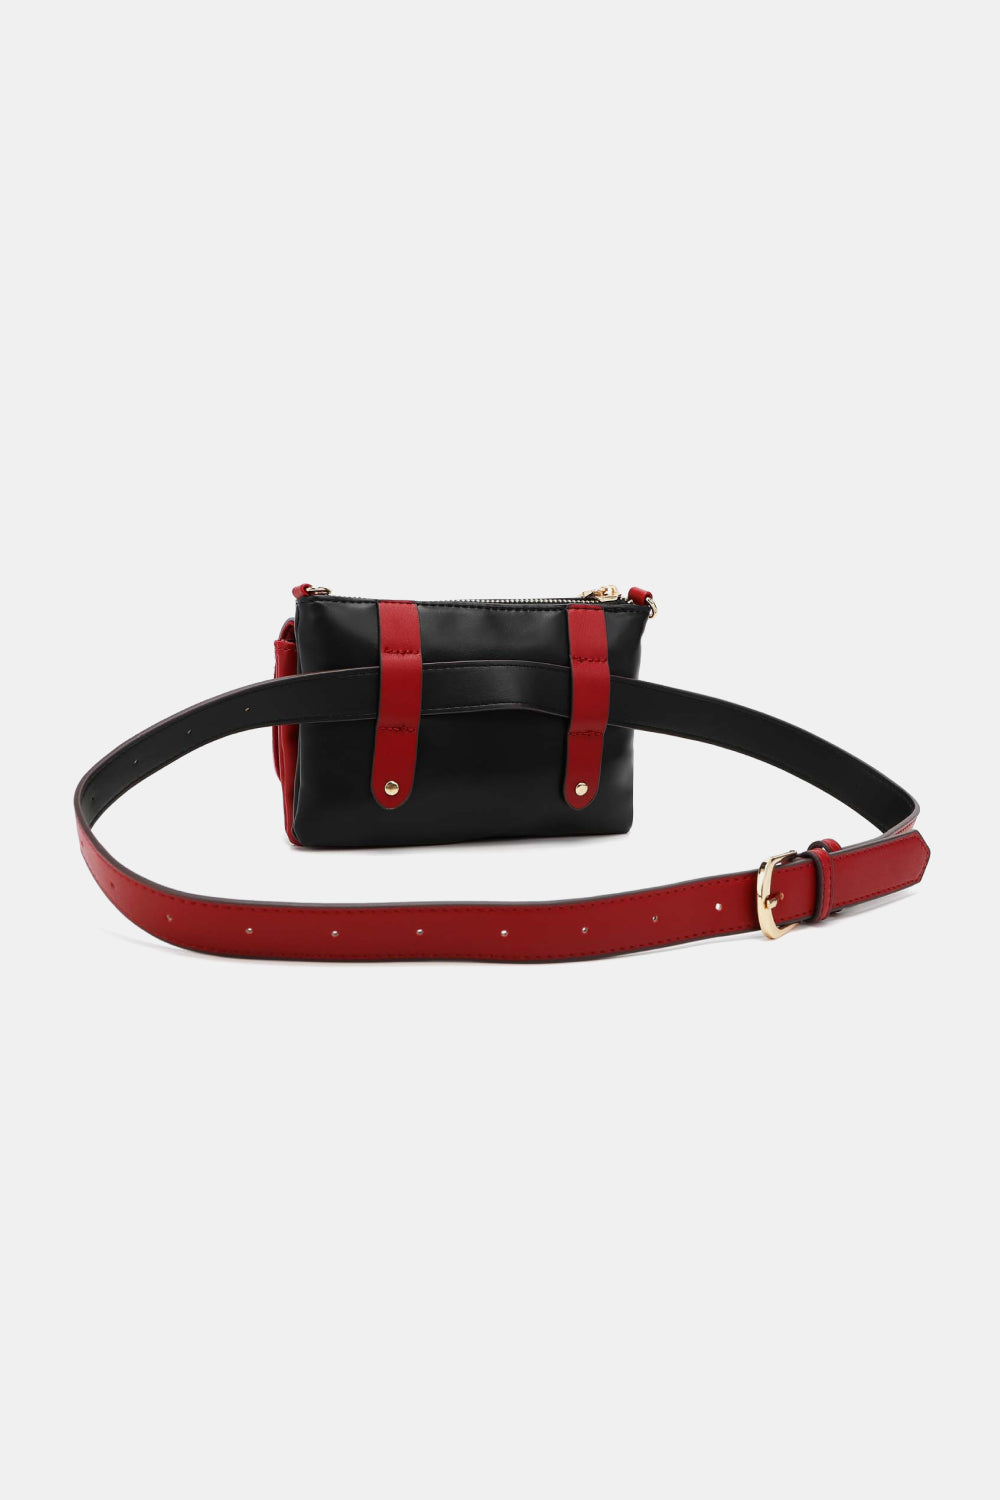 Nicole Lee USA Vegan Leather Small Fanny Pack